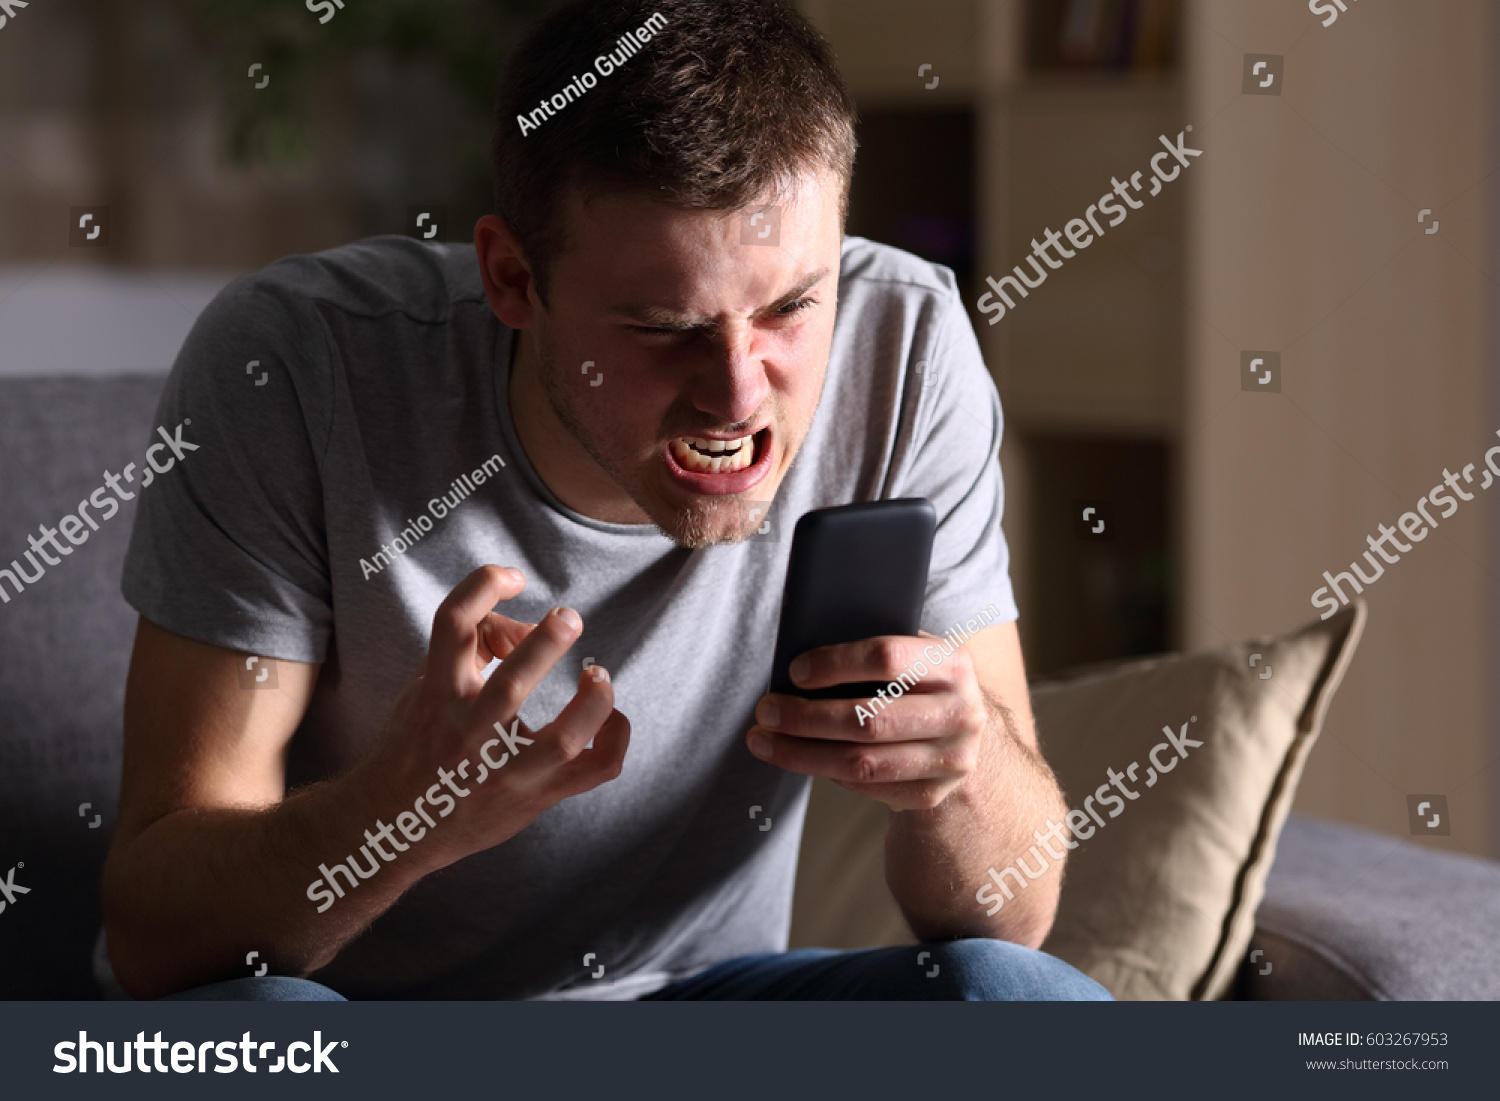 Single angry person with a mobile phone sitting on a sofa in the living room in a house indoor with a dark background #603267953